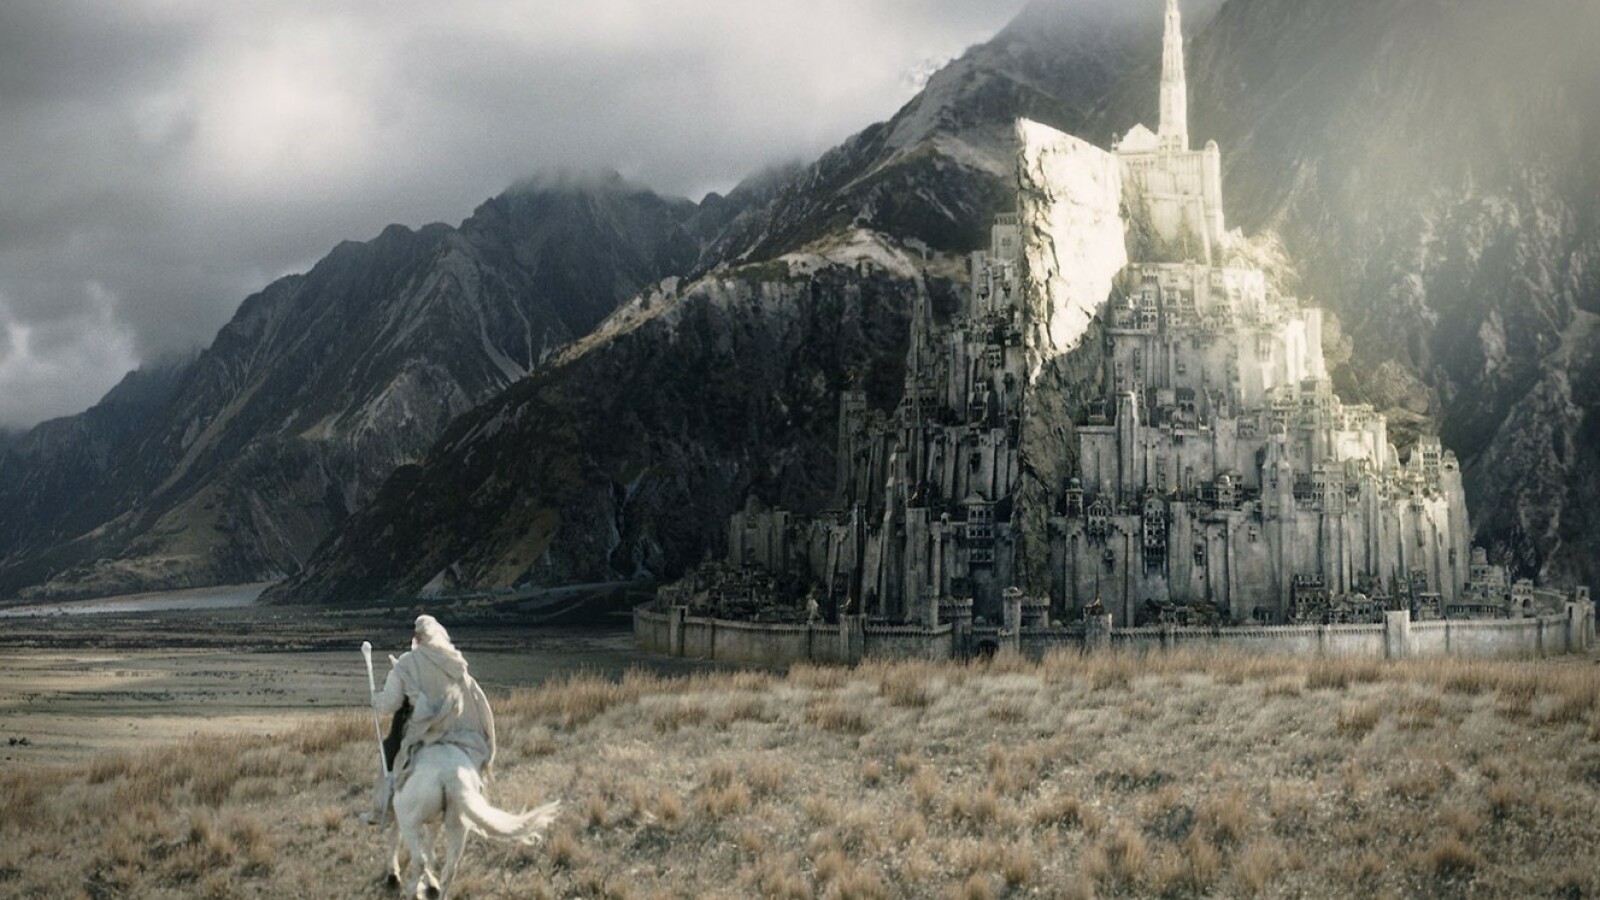 “The Lord of the Rings” series: Amazon is not filming the second season in New Zealand!